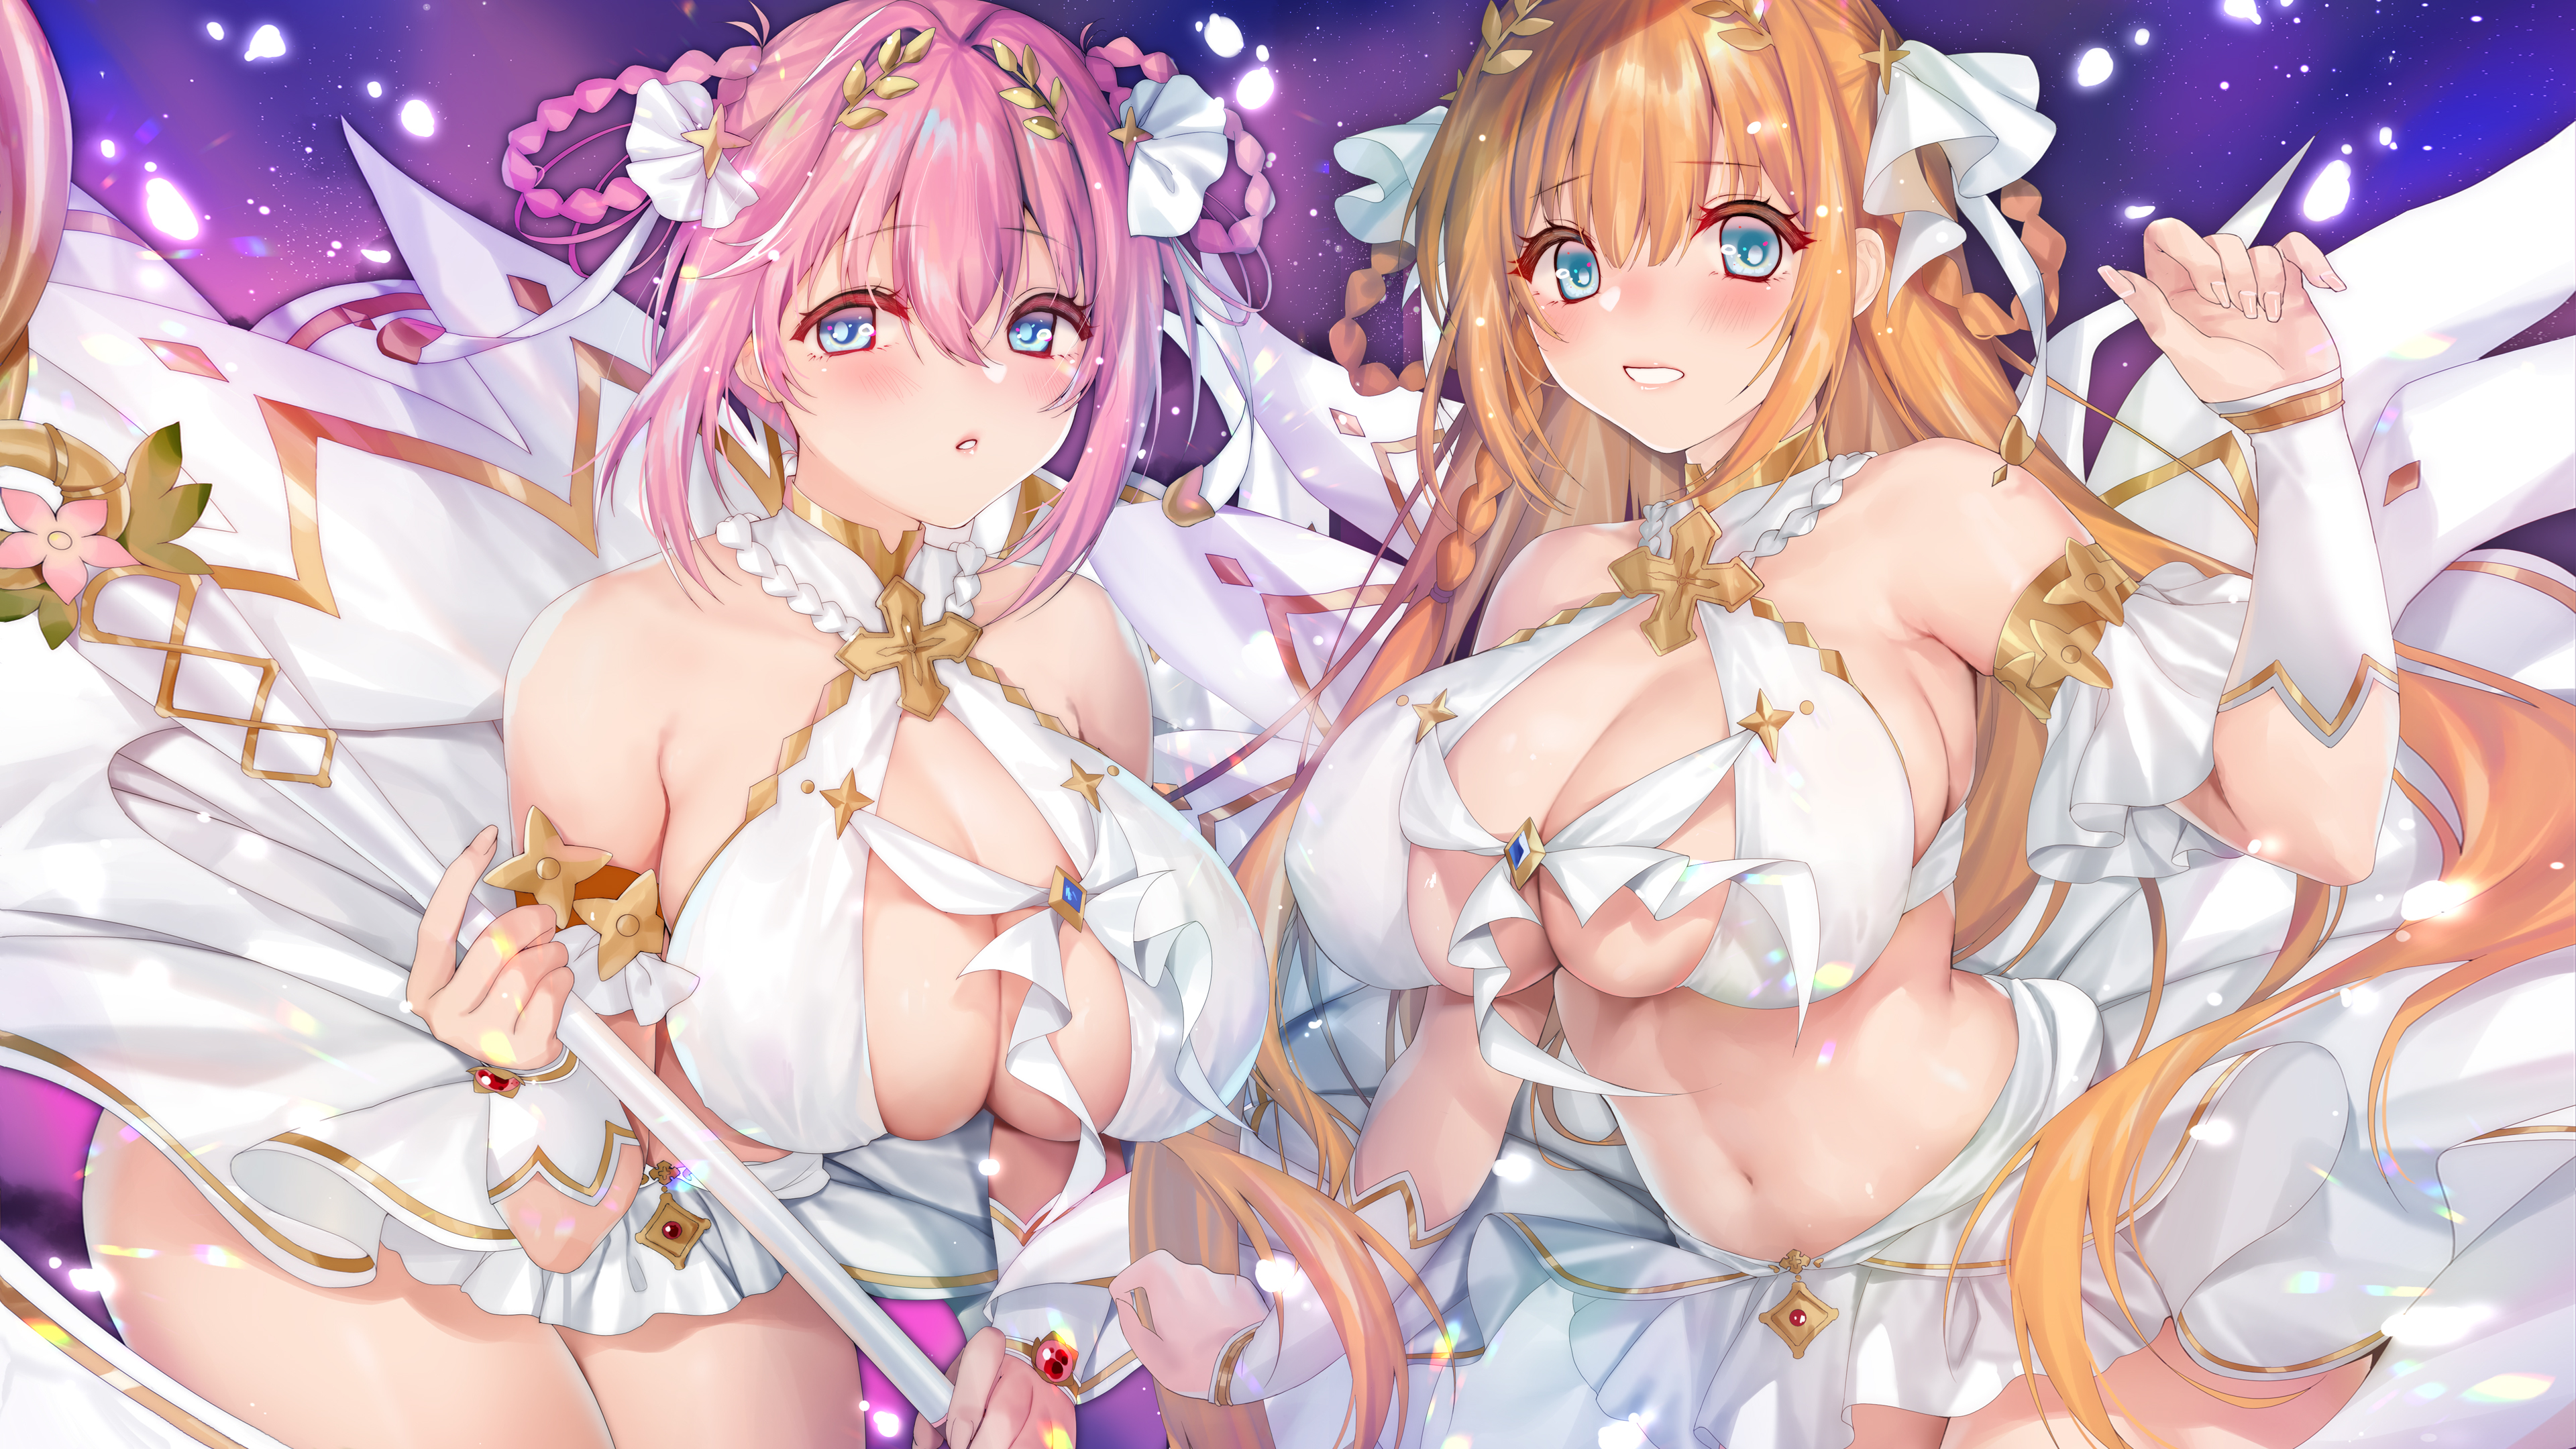 Anime 3840x2160 anime anime girls big boobs cleavage pink hair blonde Princess Connect Re:Dive artwork Xin (artist)